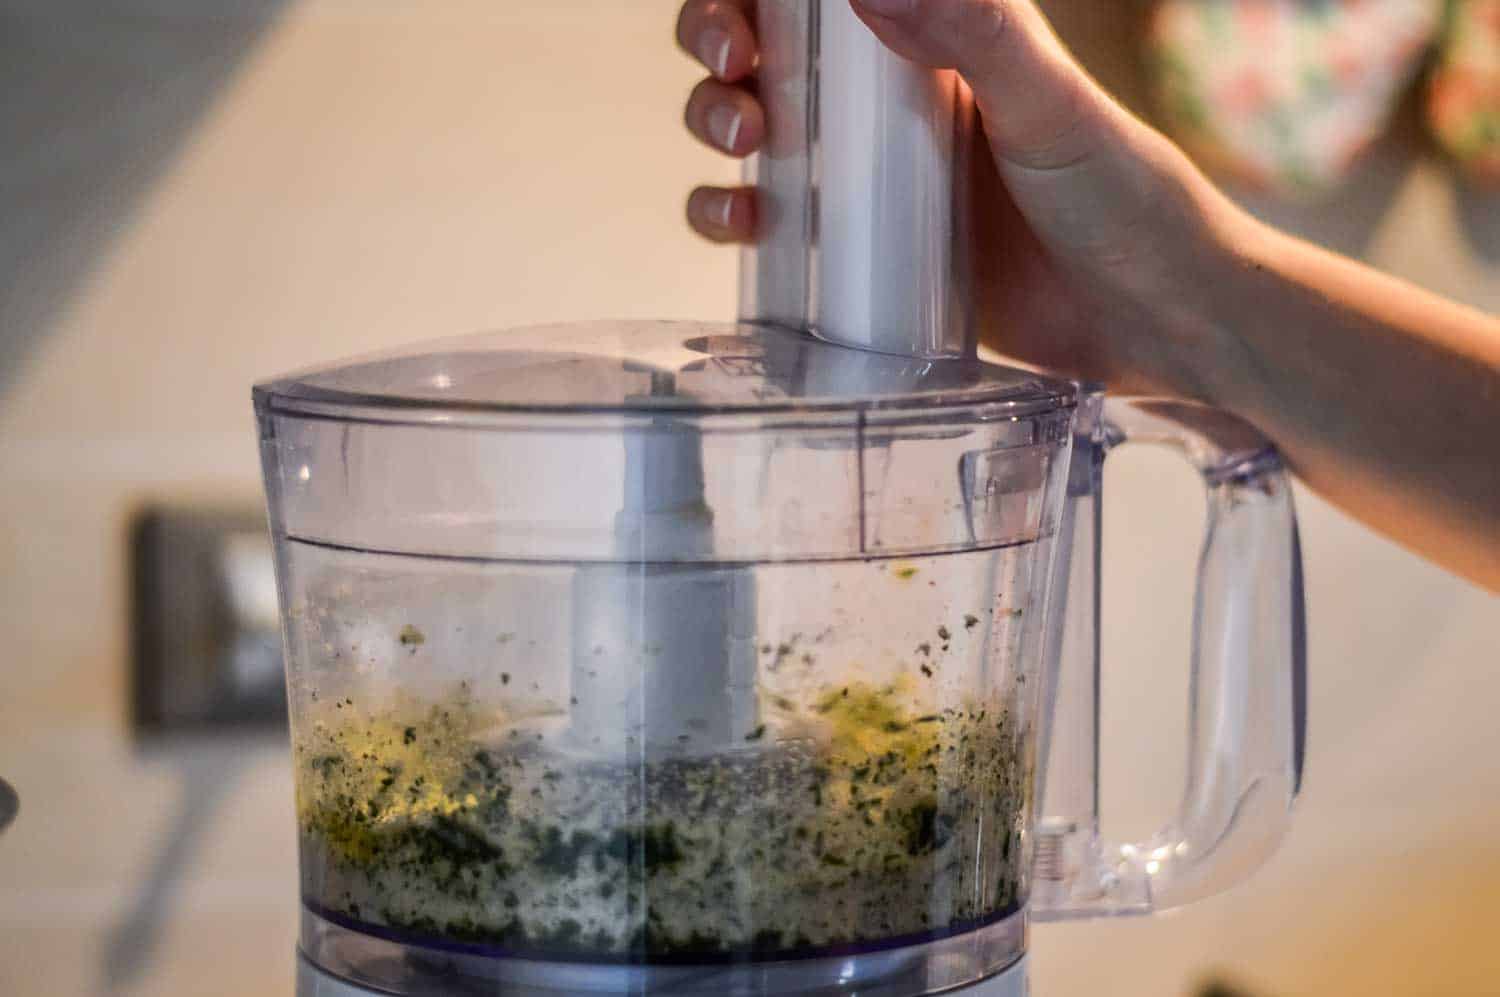 Parsley and bread crumbs on electric blender bowl